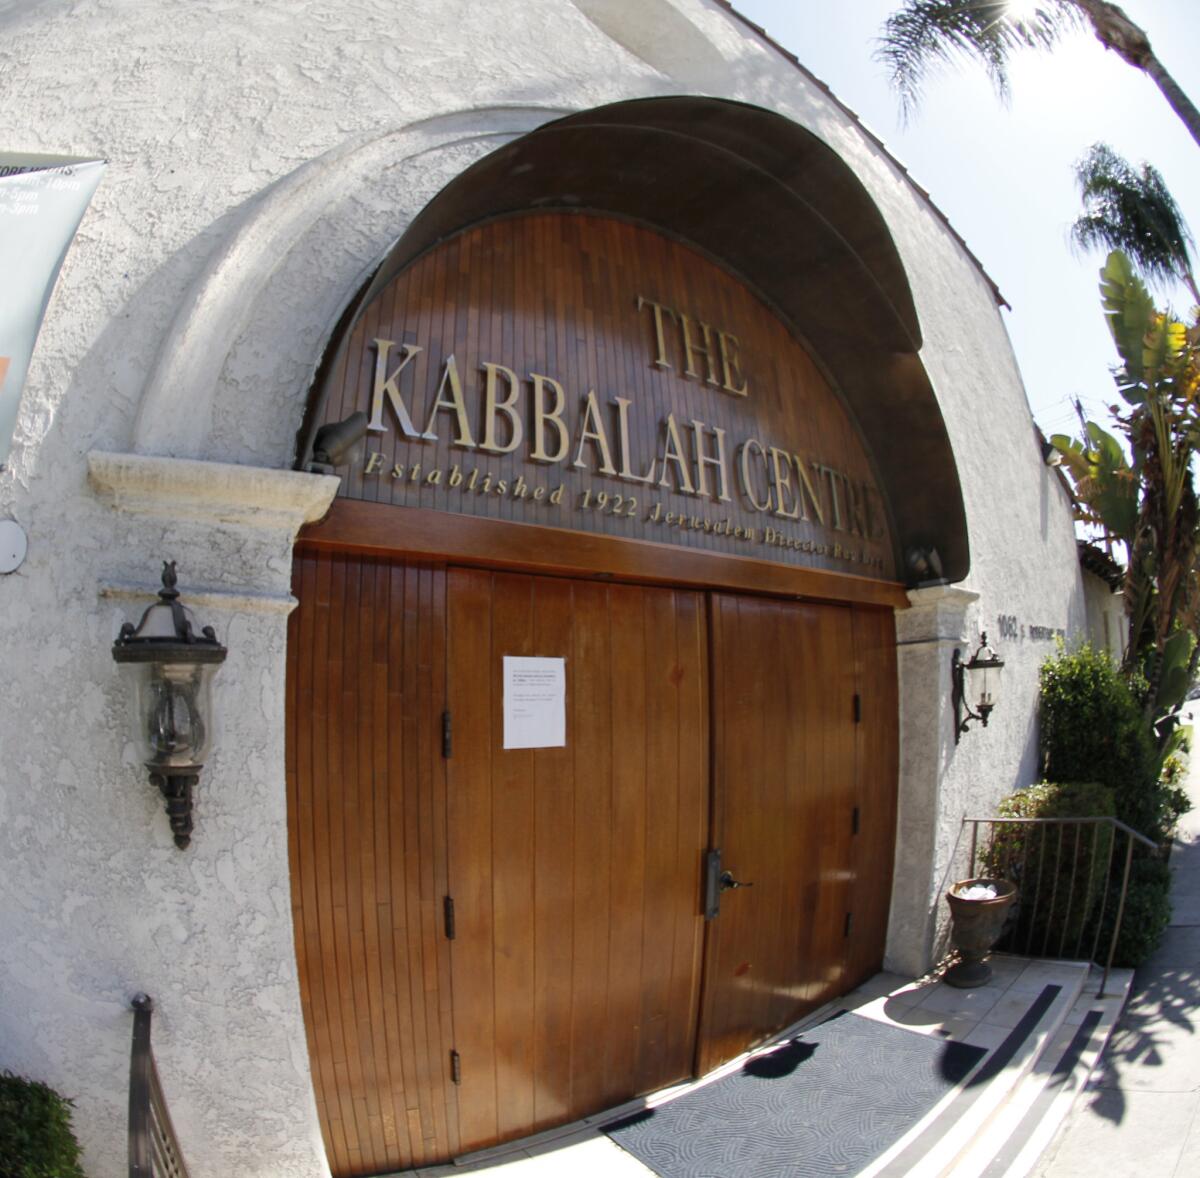 Lawsuits allege that Kabbalah Centre employees pressured the plaintiffs "to give money until it hurts" in order to receive "the light" and win favor with the center's leaders, Karen Berg and her adult sons Yehuda and Michael.